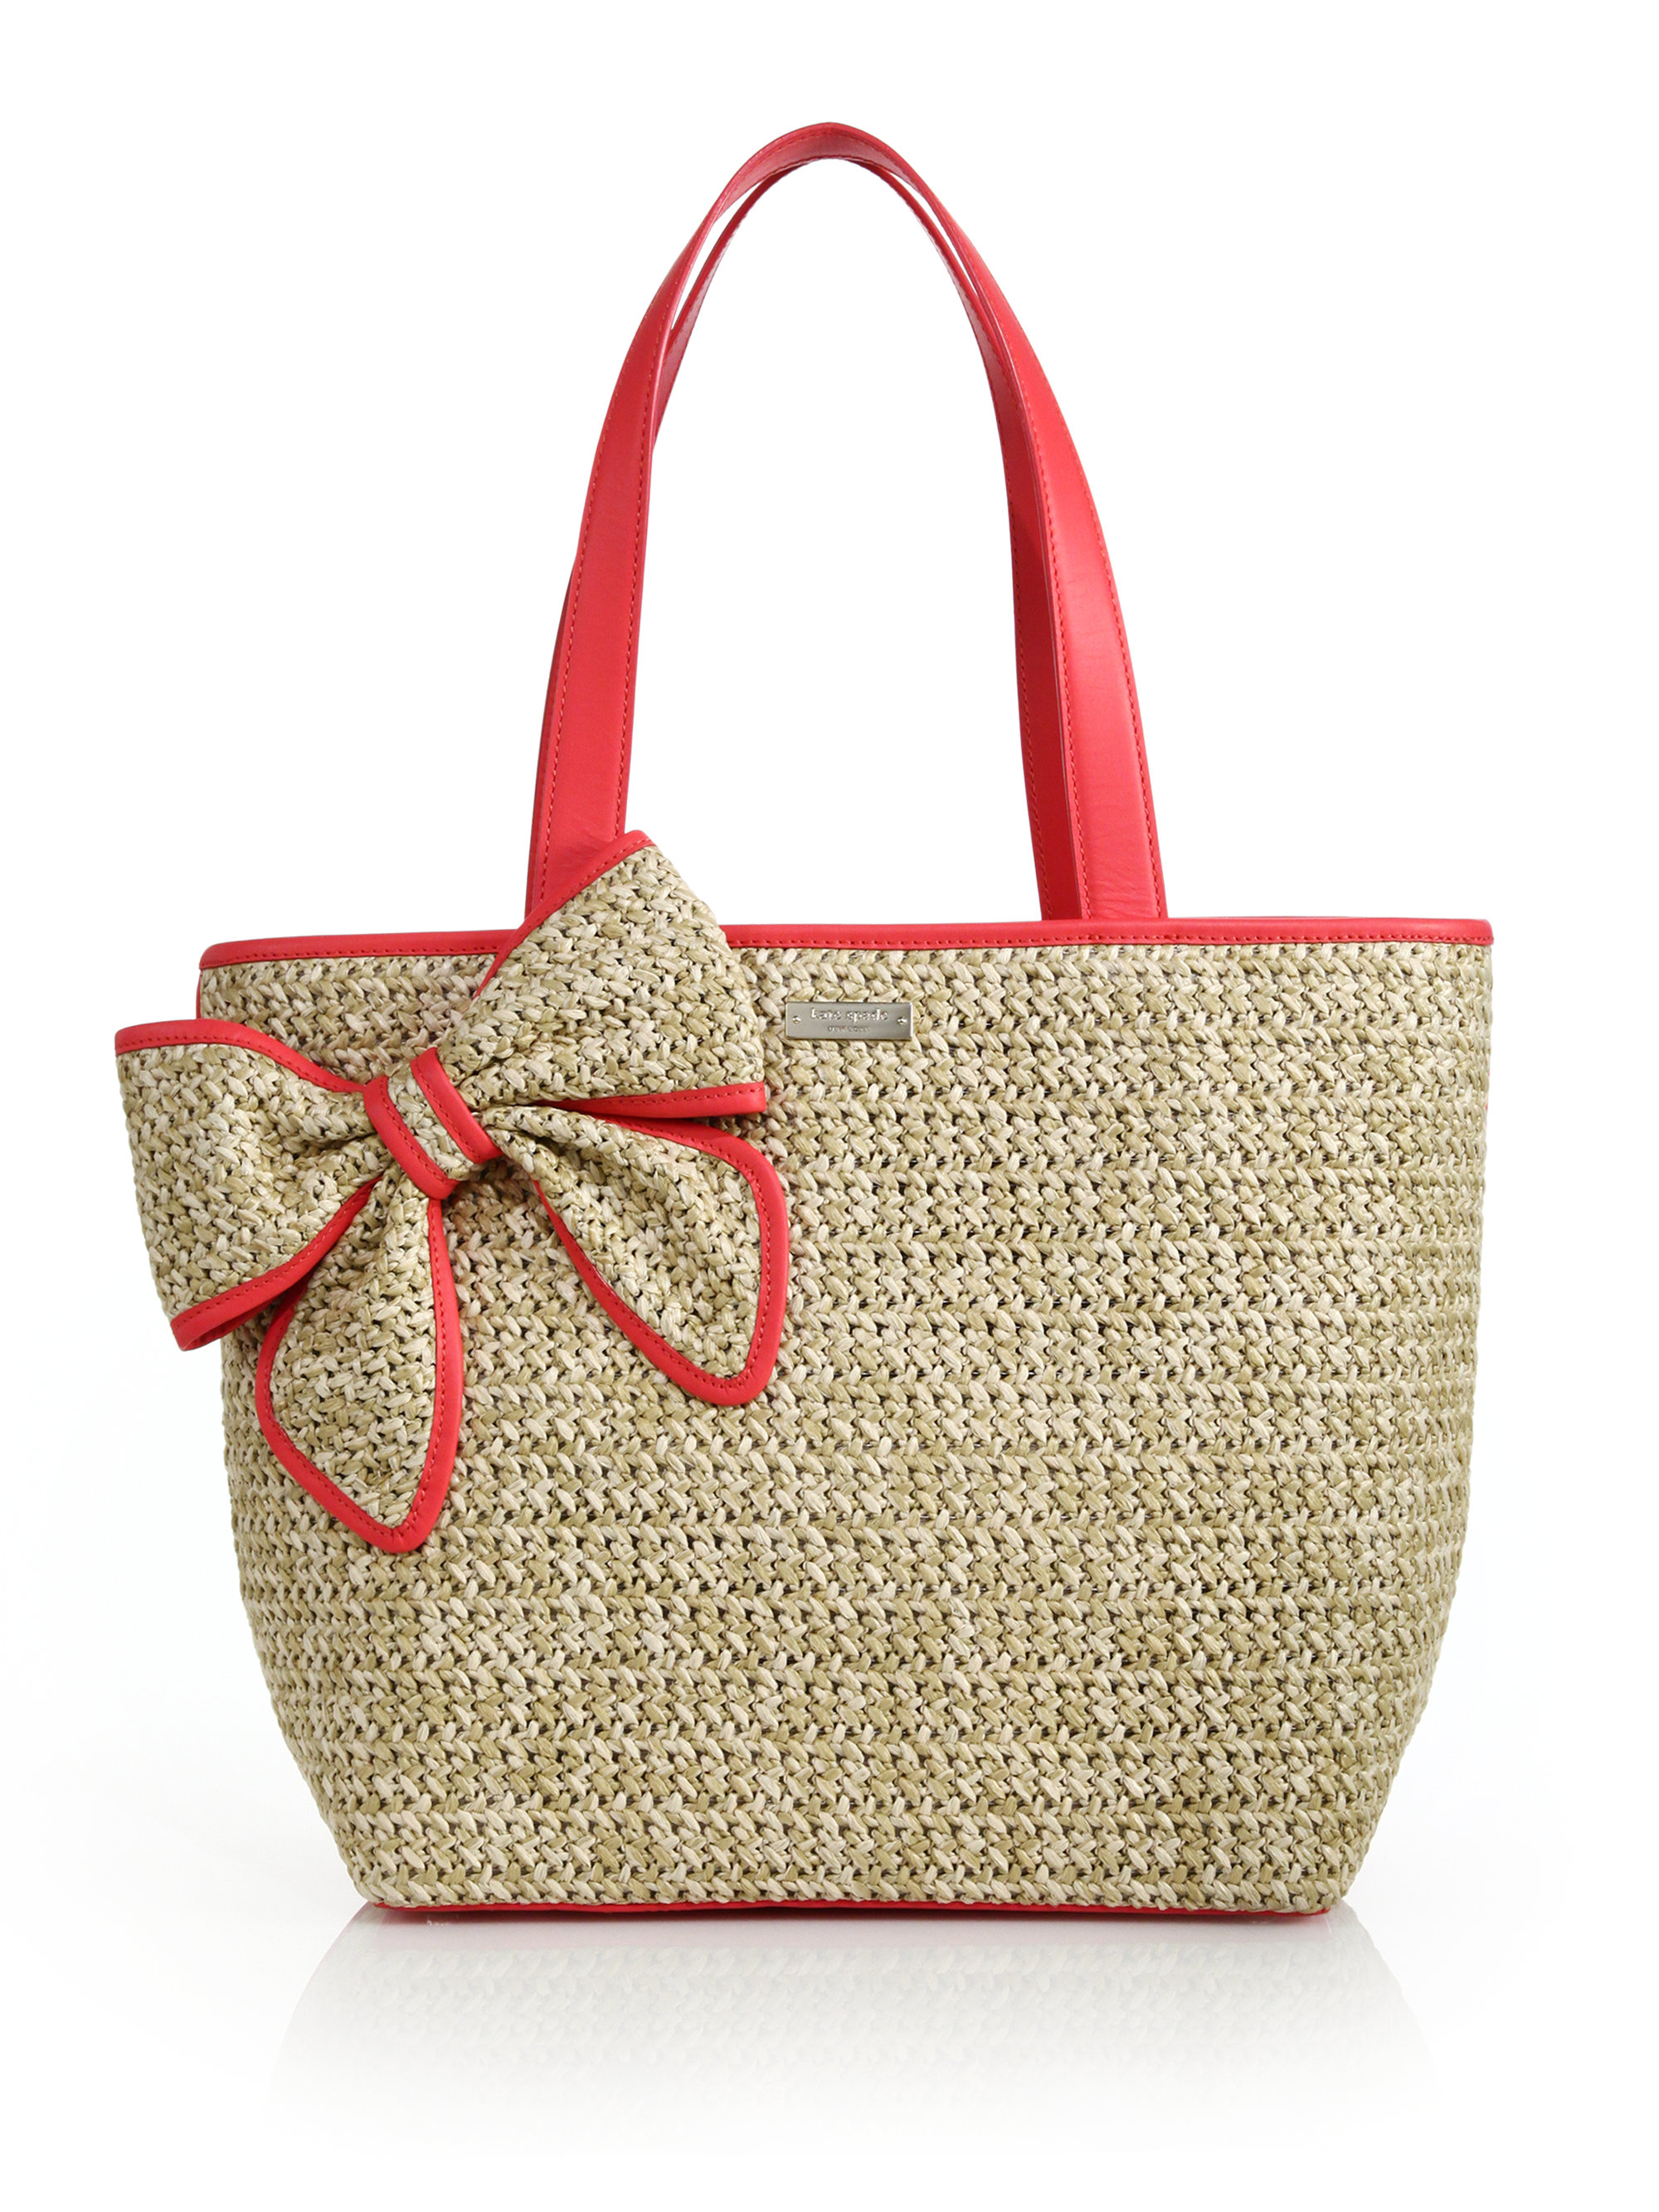 Kate Spade New York Women's Tote Bags - Red